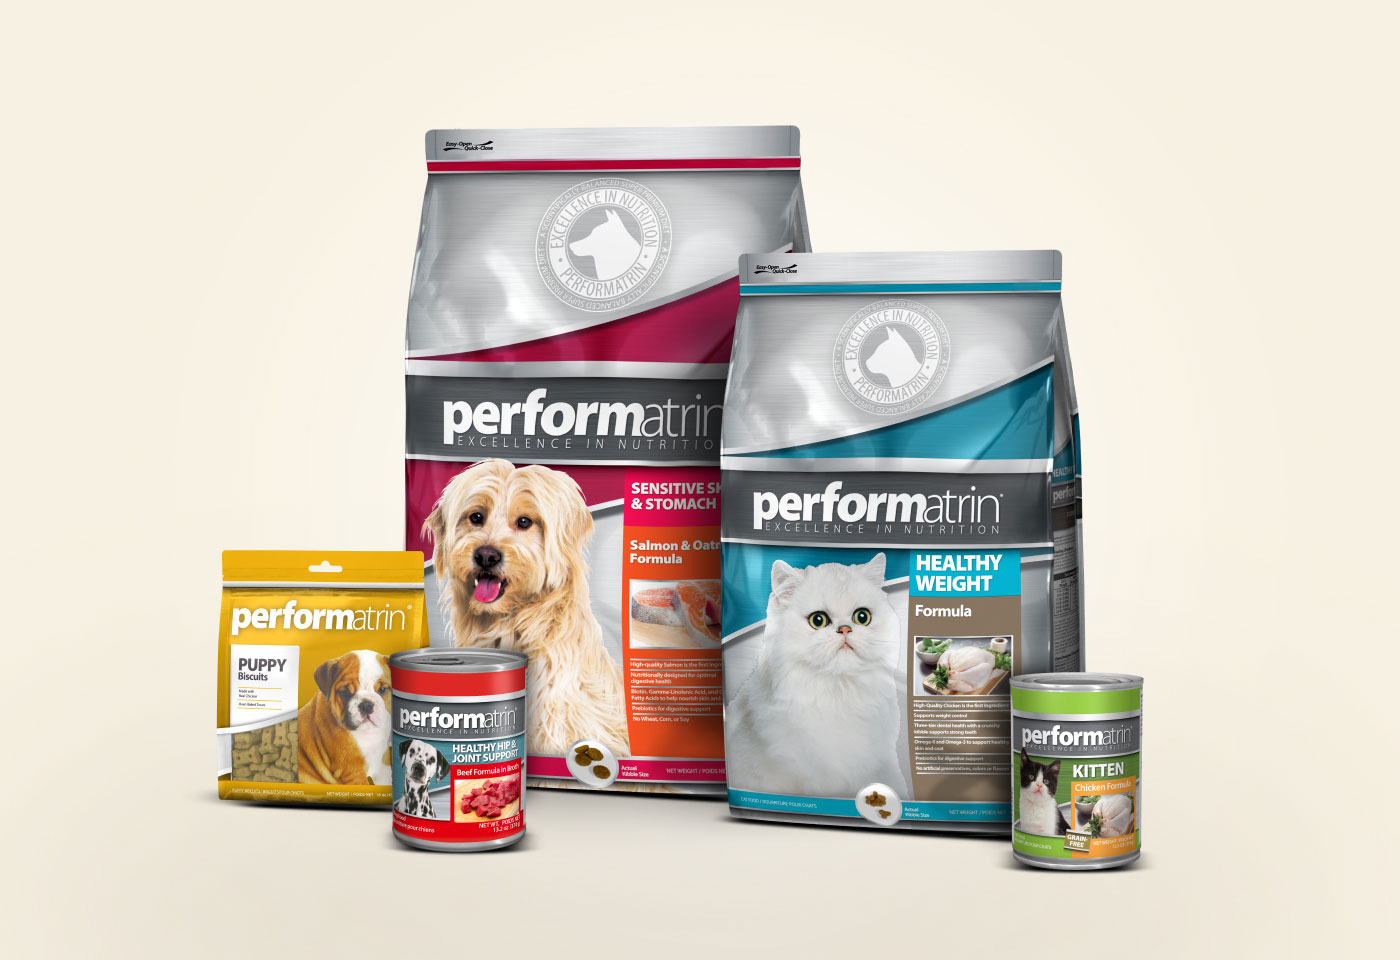 Performatrin wide range of products